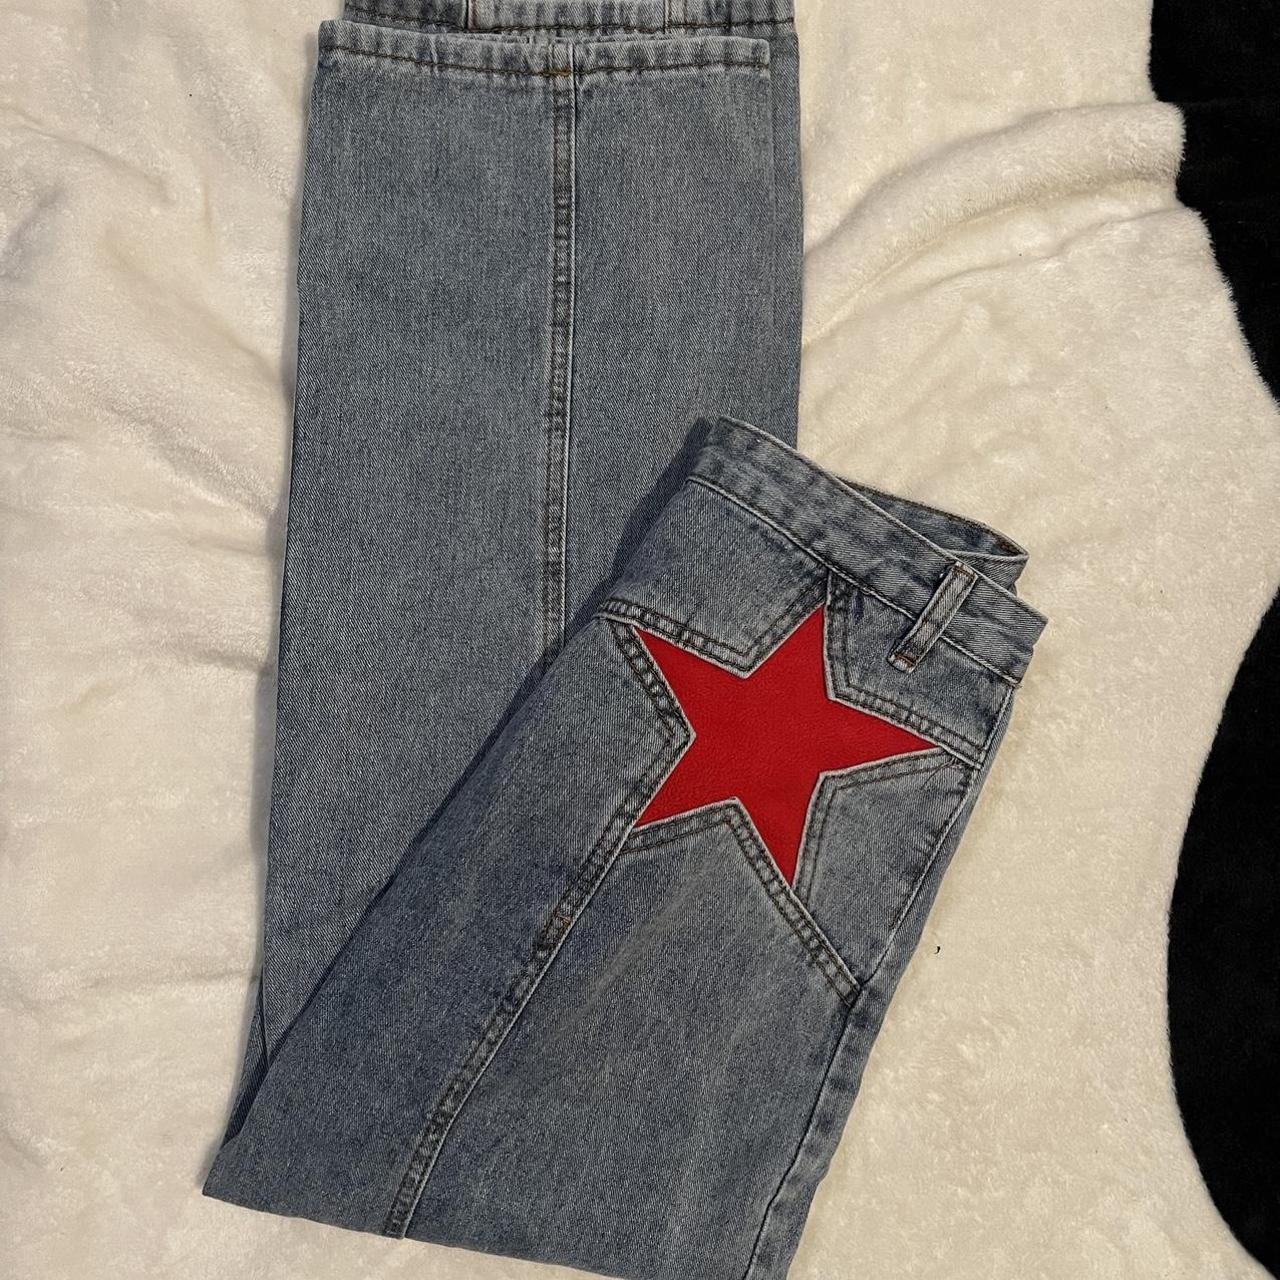 Free People Women's Blue and Red Jeans | Depop